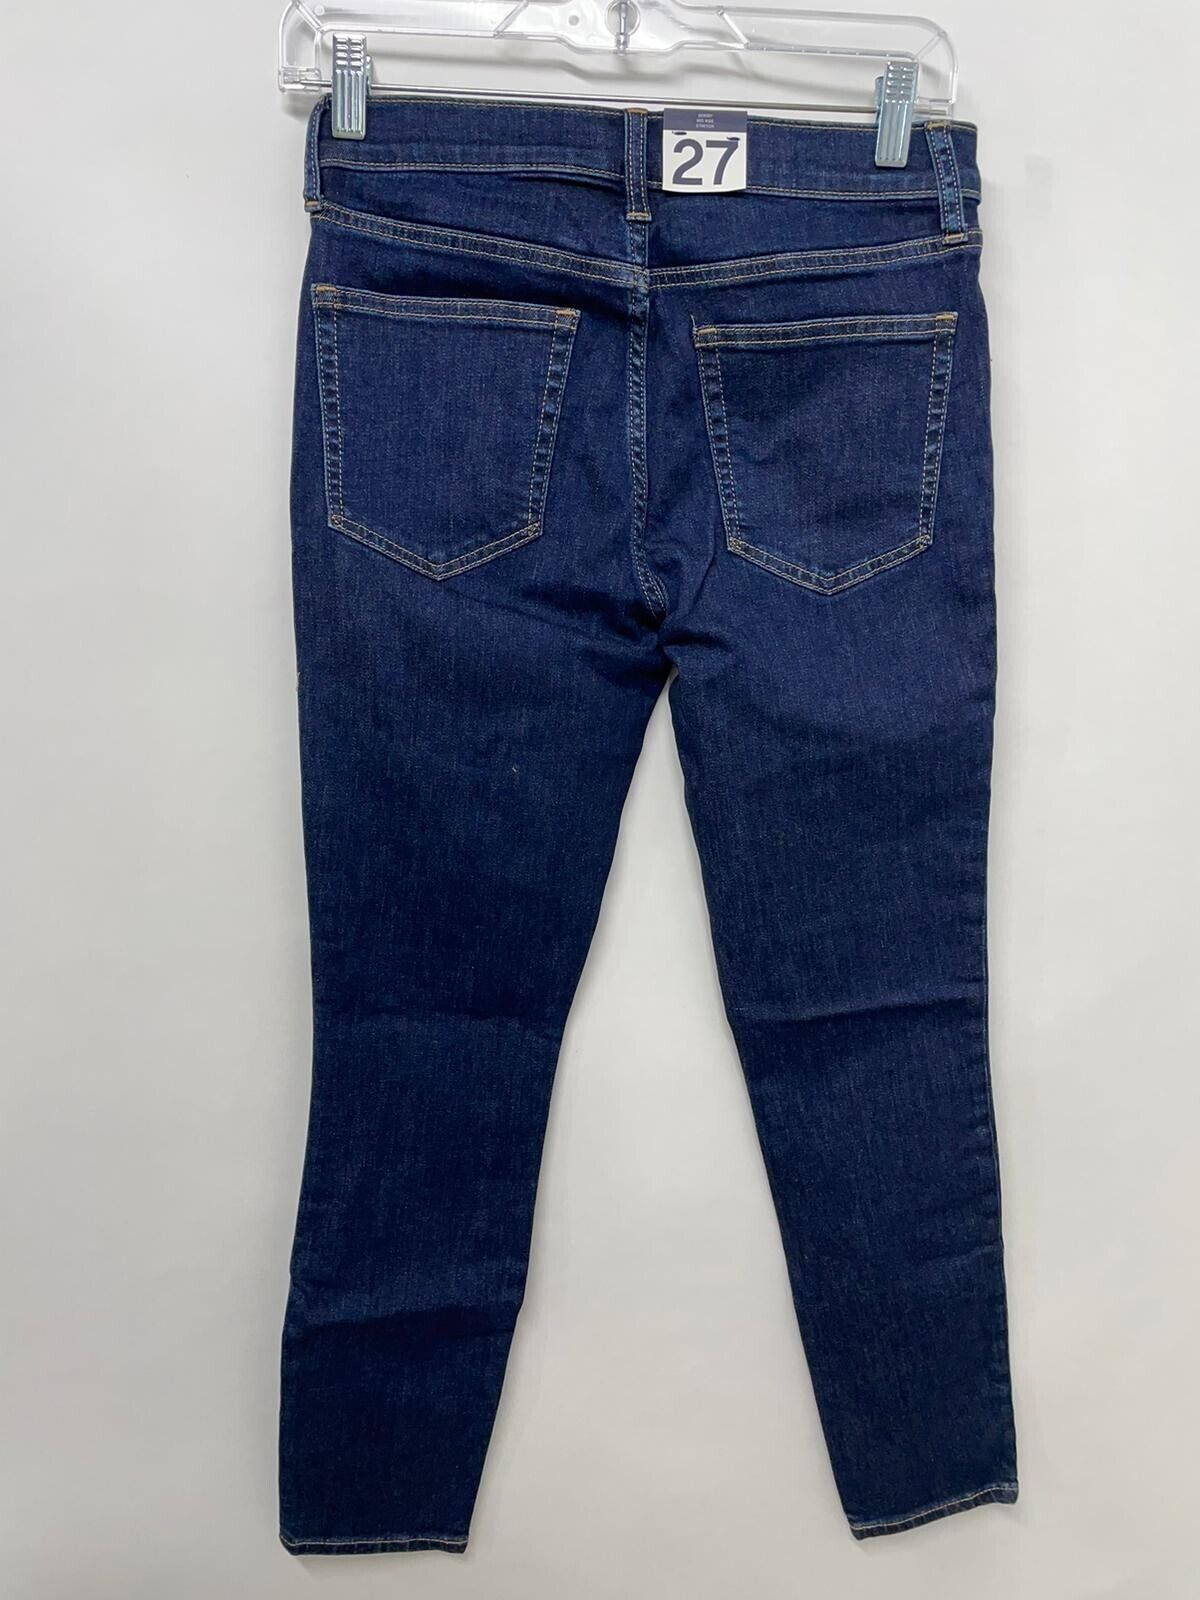 Gap Womens 27S 4P Mid Rise True Skinny Jeans With Washwell Rinses Dark Wash